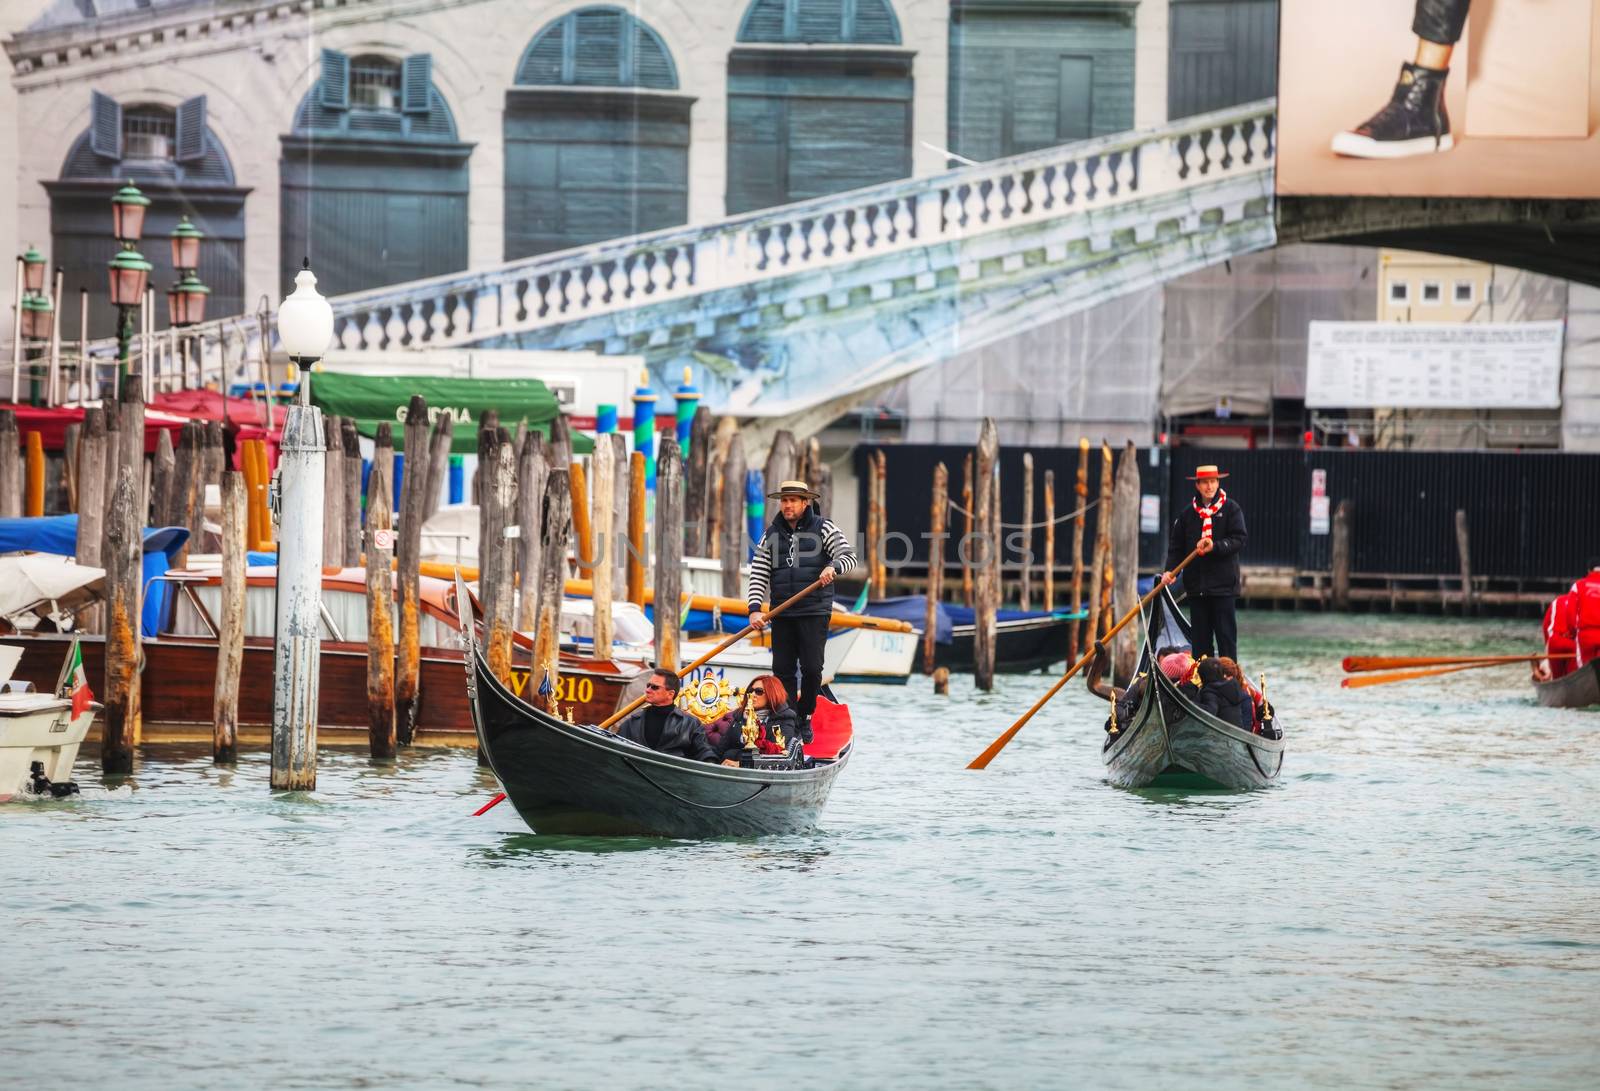 VENICE - NOVEMBER 22: Gondolas with tourists on November 22, 2015 in Venice, Italy. The gondola is a traditional, flat-bottomed Venetian rowing boat, well suited to the conditions of the Venetian lagoon. 